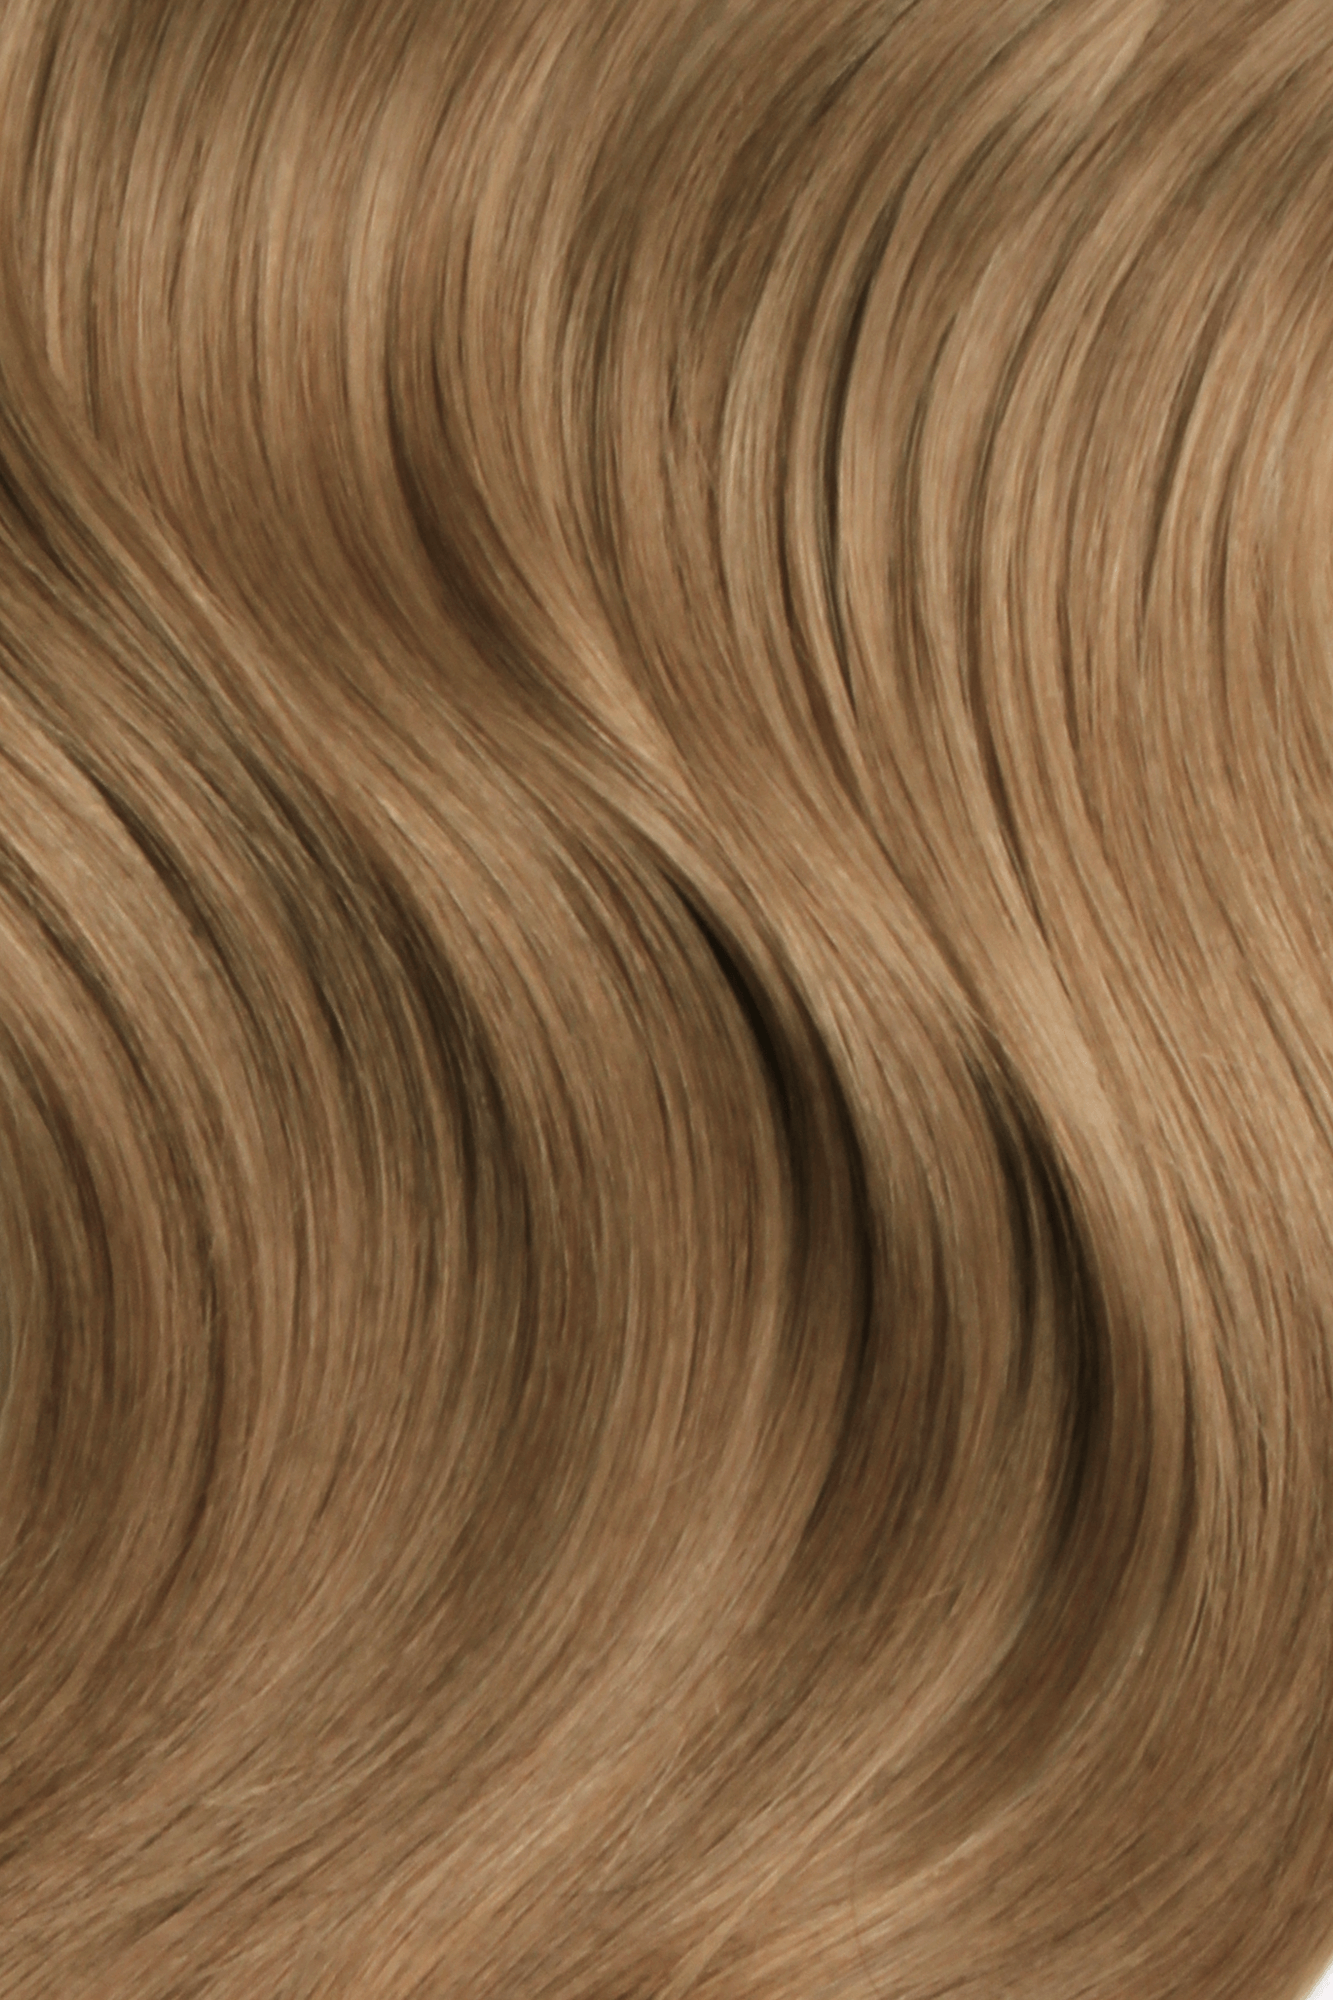 SEAMLESS® Flat Weft 18 Inches - SWAY Hair Extensions Sunkissed-Brown-8-10 Natural SEAMLESS® Flat Weft 18 Inches extensions. Thin, flexible, and discreet. 100% Double Drawn Remy Human Hair. Versatile and reusable